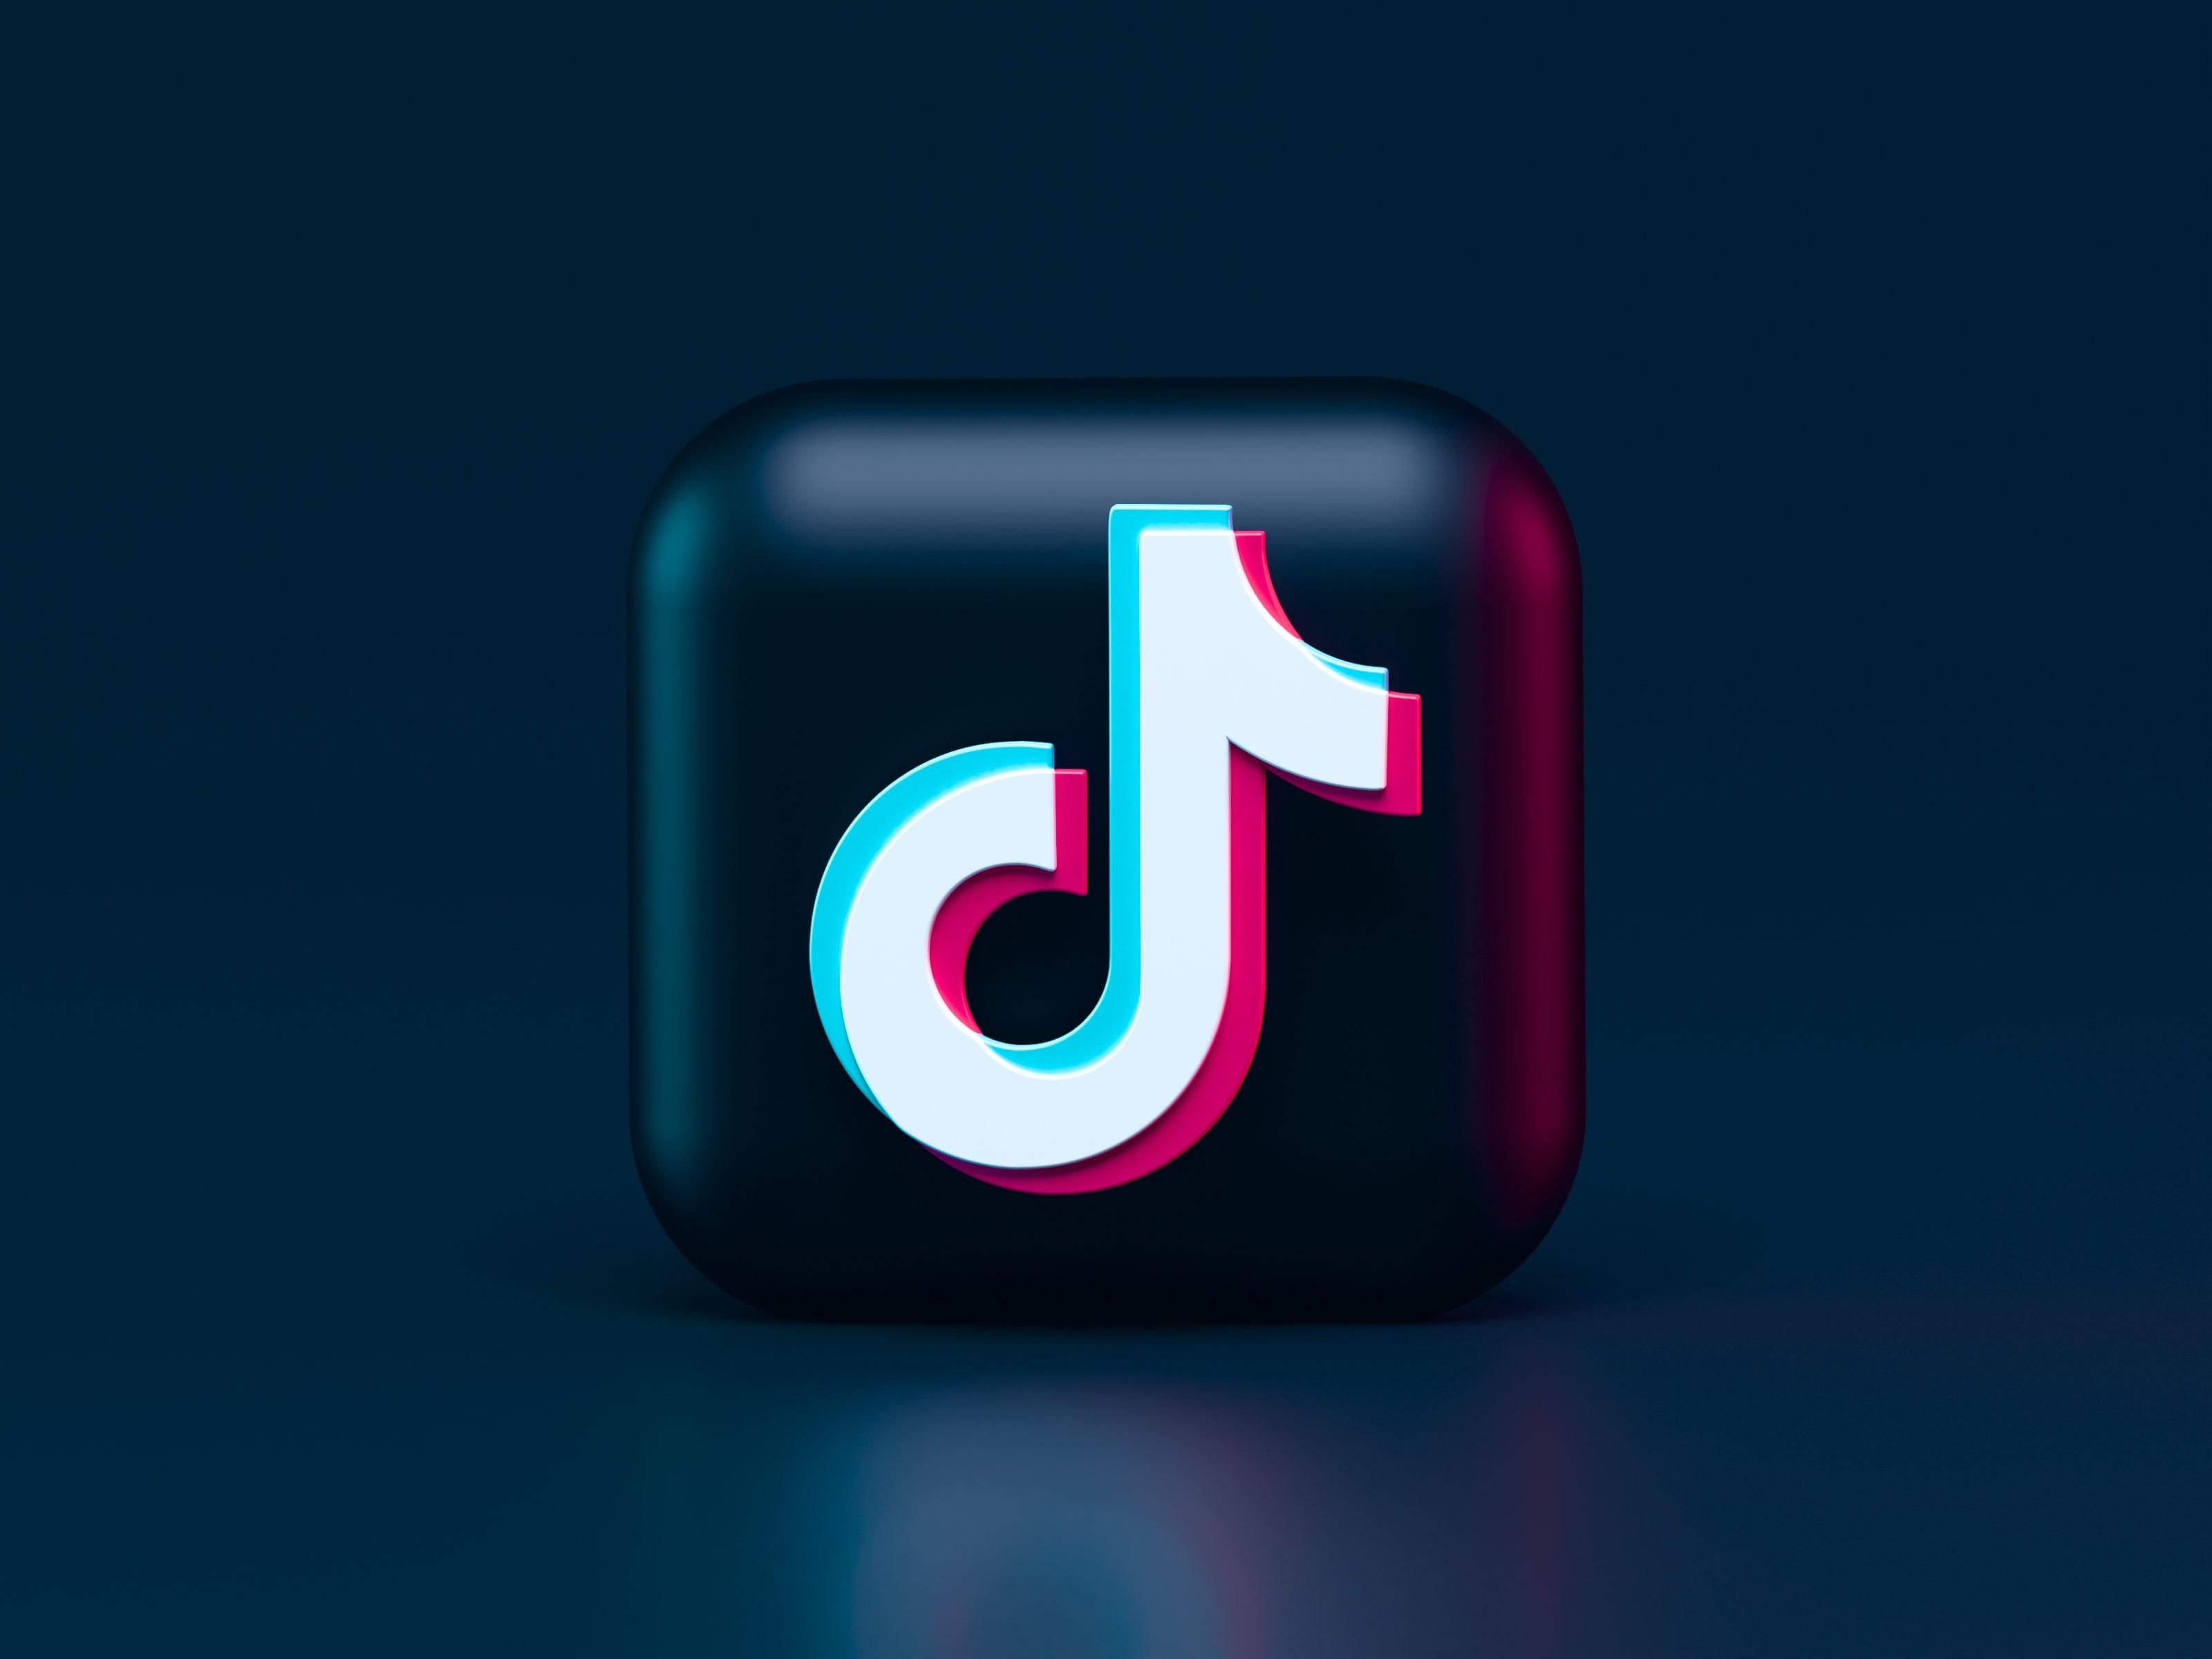 Downloader for Tiktok: How to Download Videos from TikTok to Your Computer or Mobile